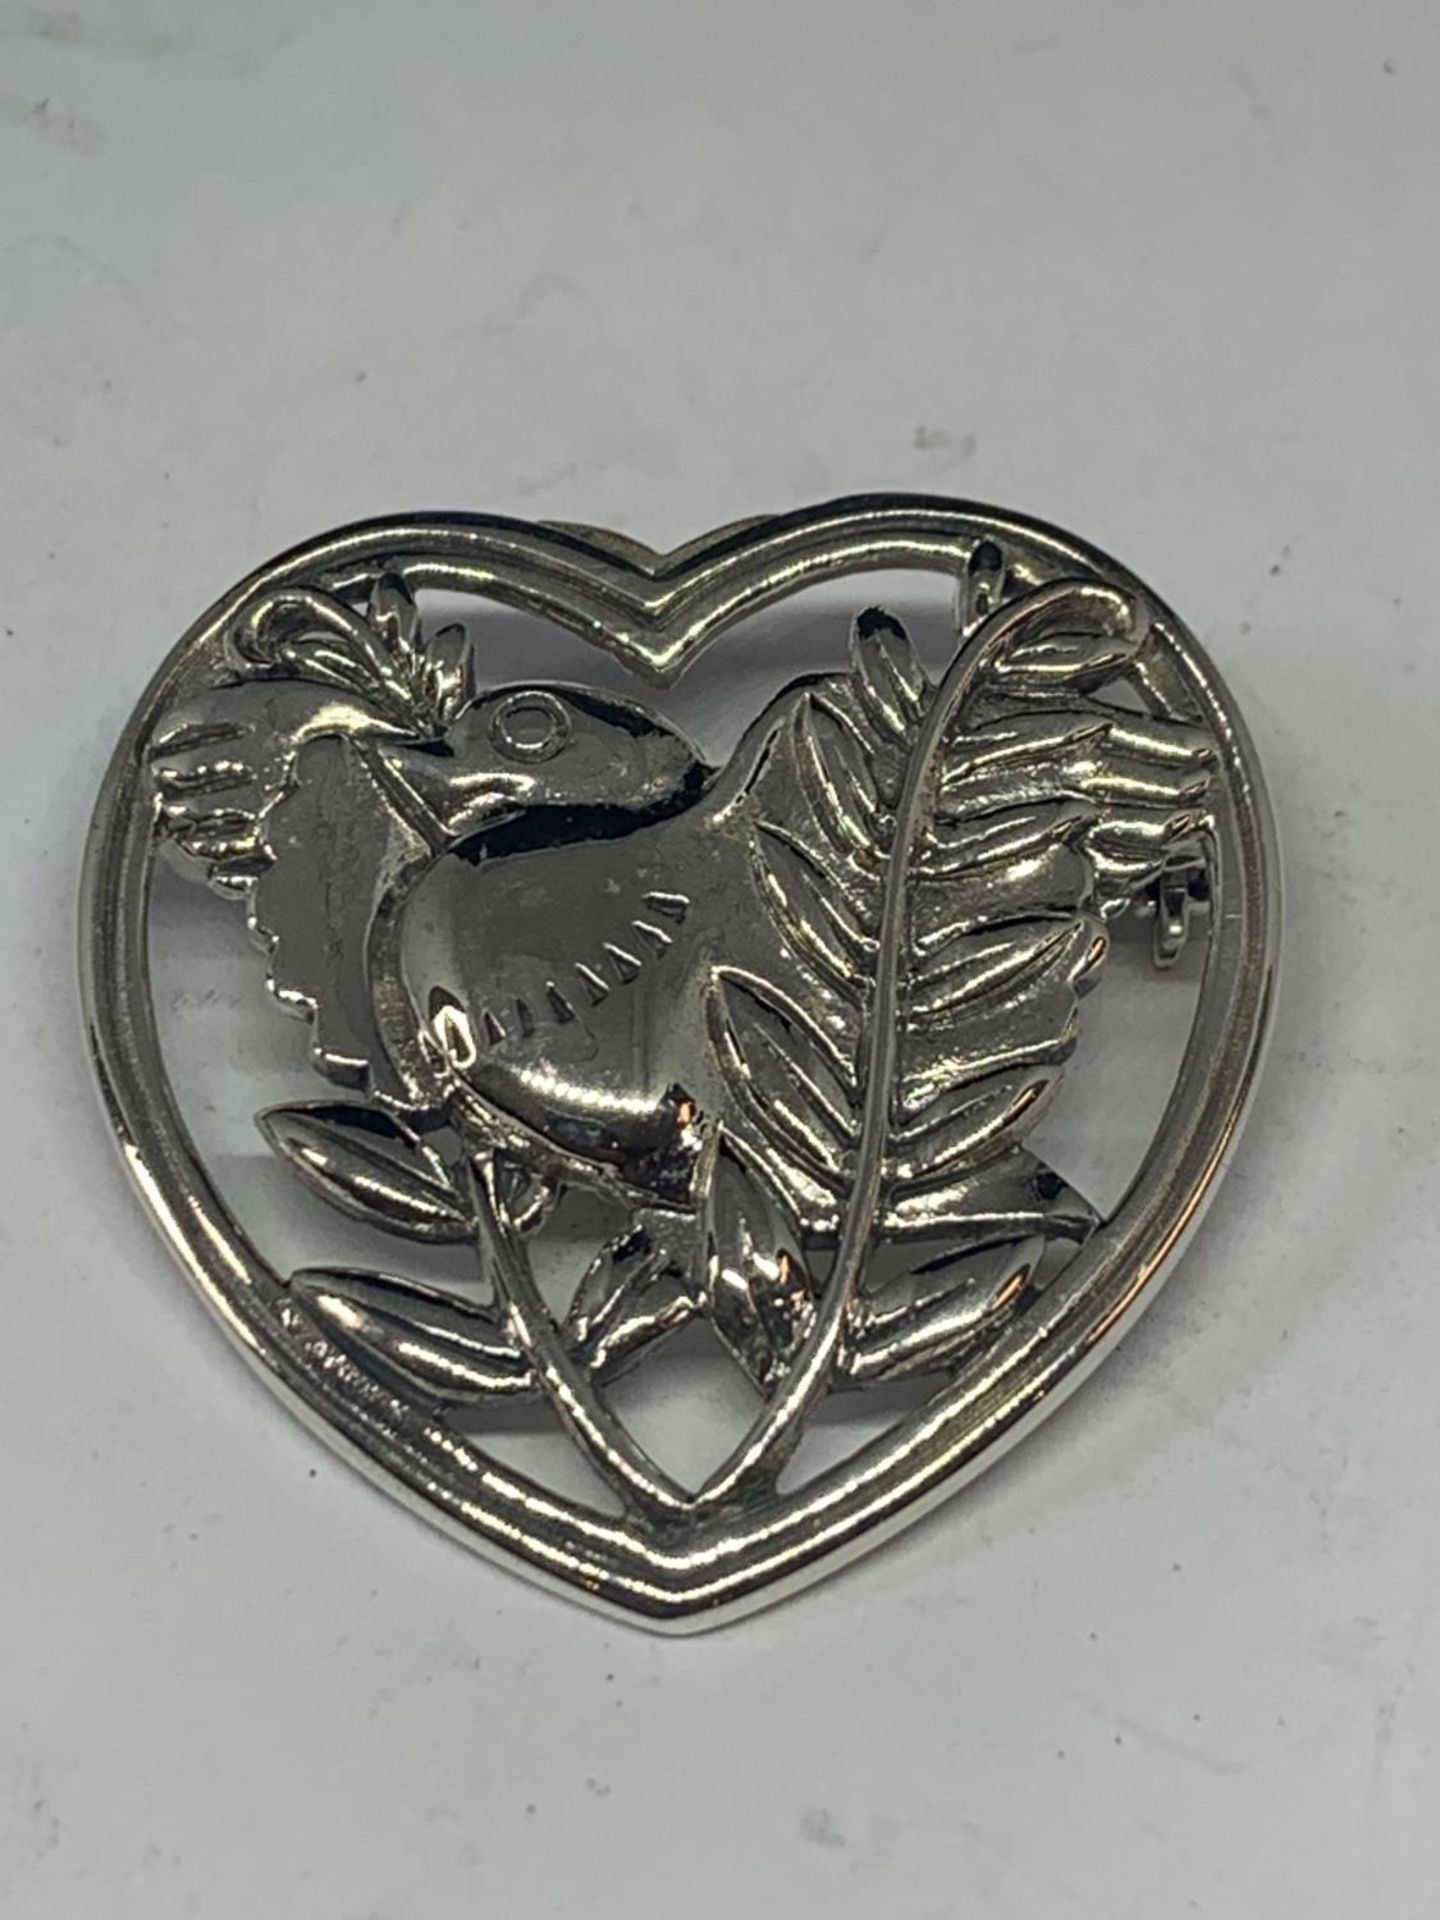 A MARKED DENMARK SILVER HEART SHAPED BROOCH WITH BIRD AND LEAF DESIGN - Image 2 of 4